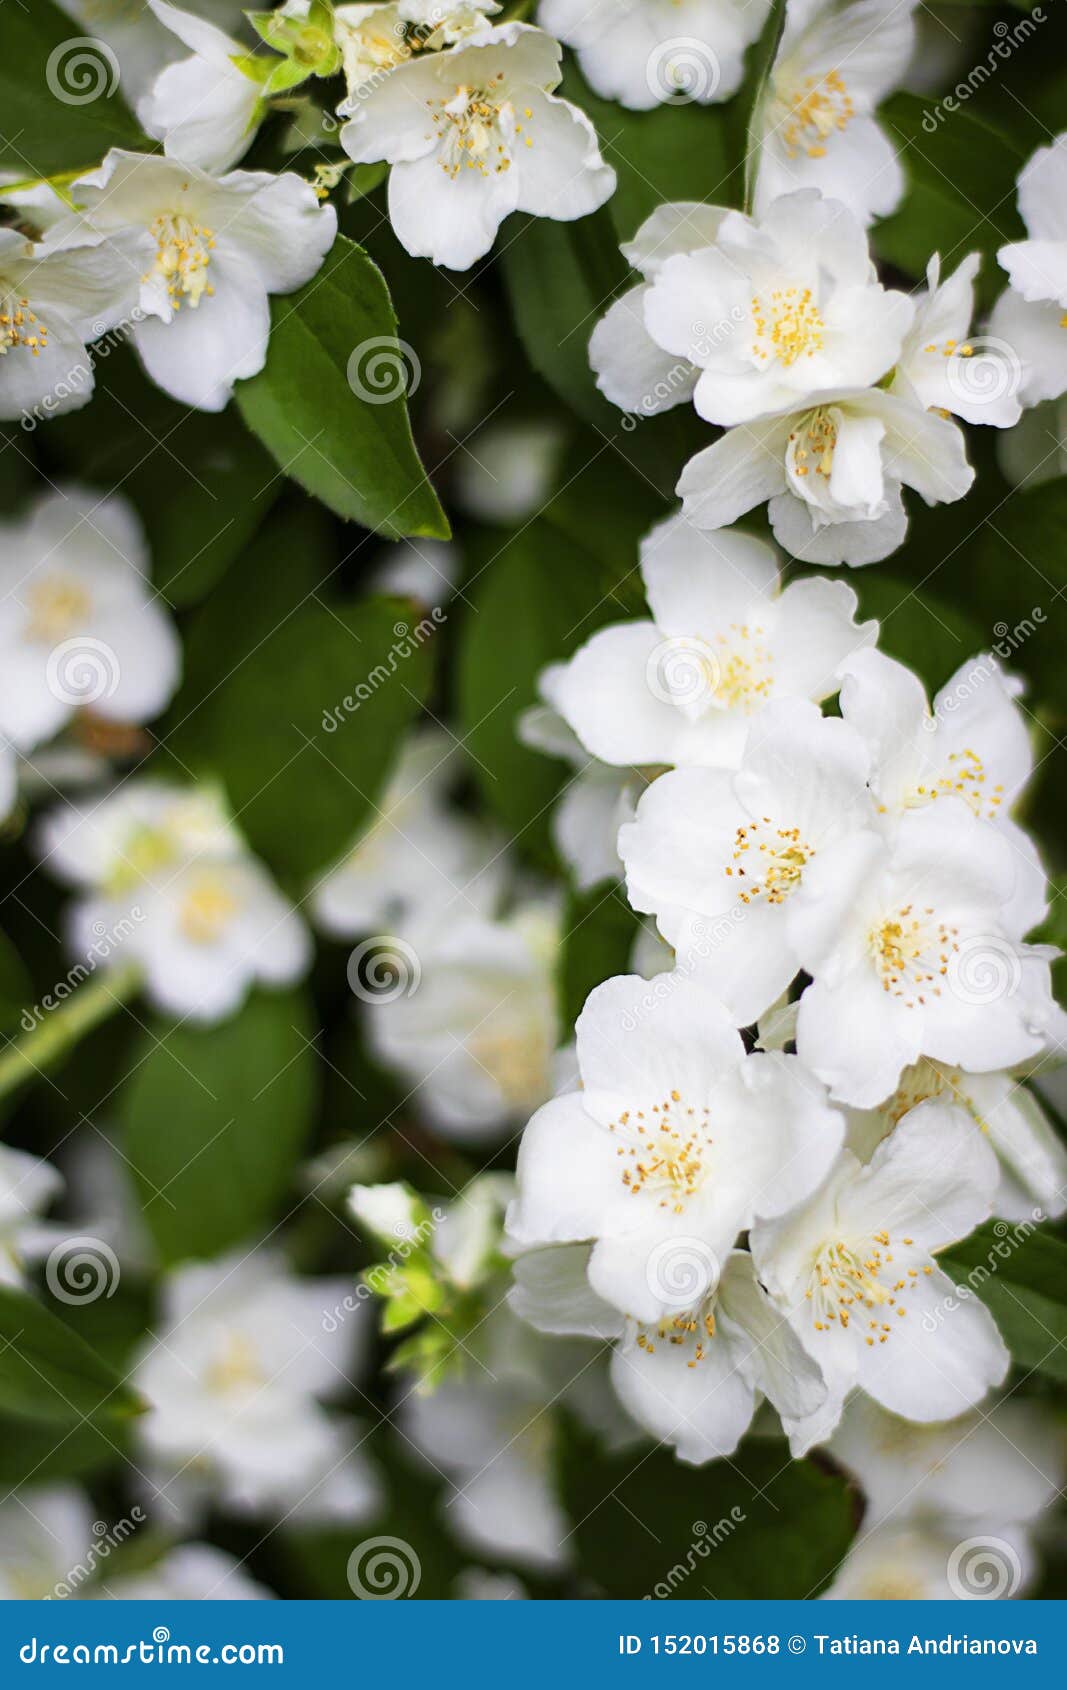 White Flowers of Jasmine with Green Leaves, Three in Focus. Spring and  Summer Background or Wallpaper for Gardening Stock Photo - Image of  freshness, decorative: 152015868